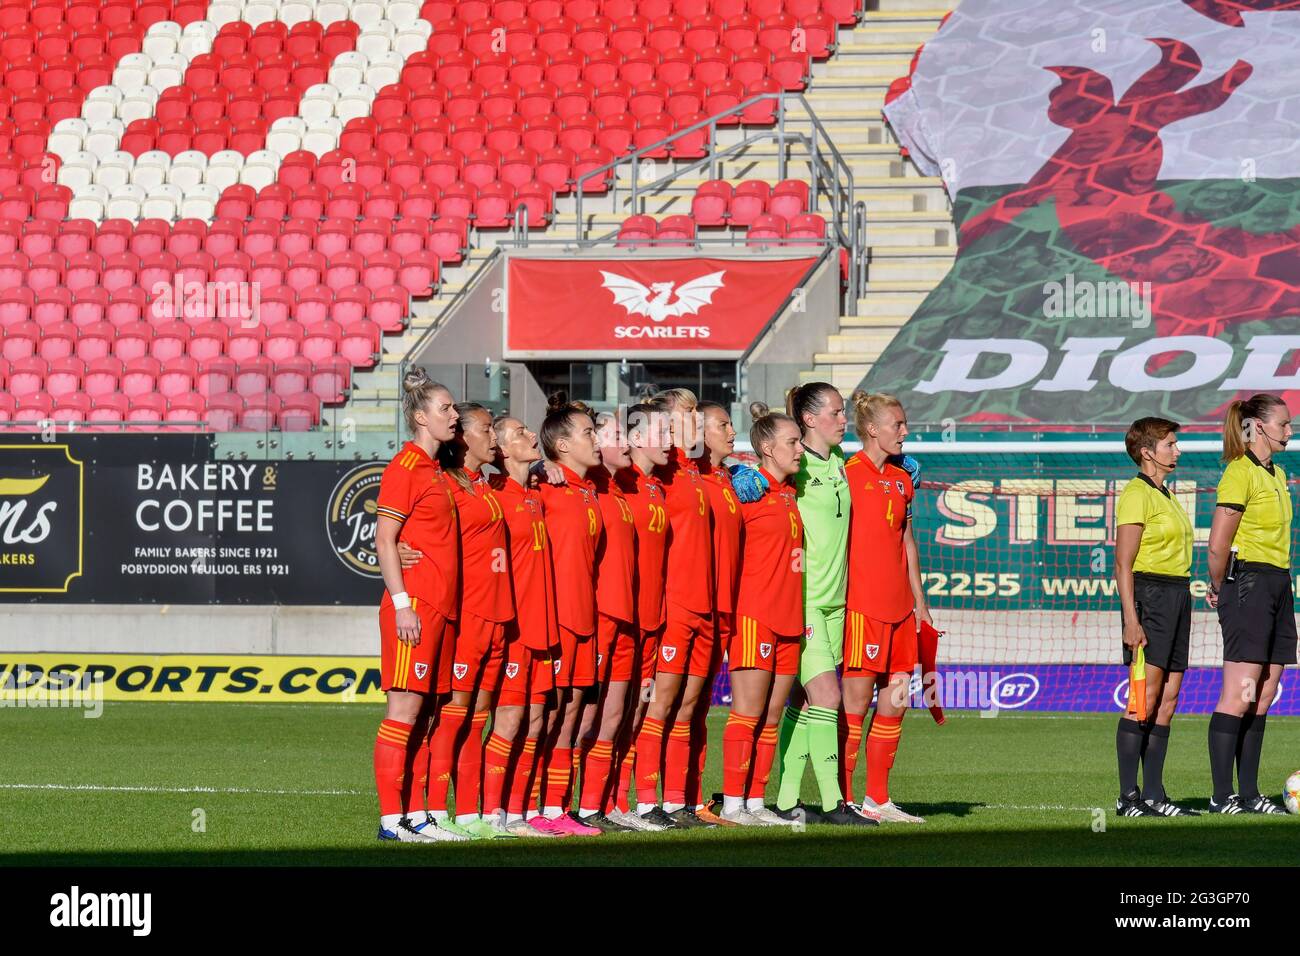 Llanelli, Wales. 15 June, 2021. The Wales Women's football team sing the National Anthem before the Women's International Friendly match between Wales Women and Scotland Women at Parc y Scarlets in Llanelli, Wales, UK on 15, June 2021. Credit: Duncan Thomas/Majestic Media/Alamy Live News. Stock Photo